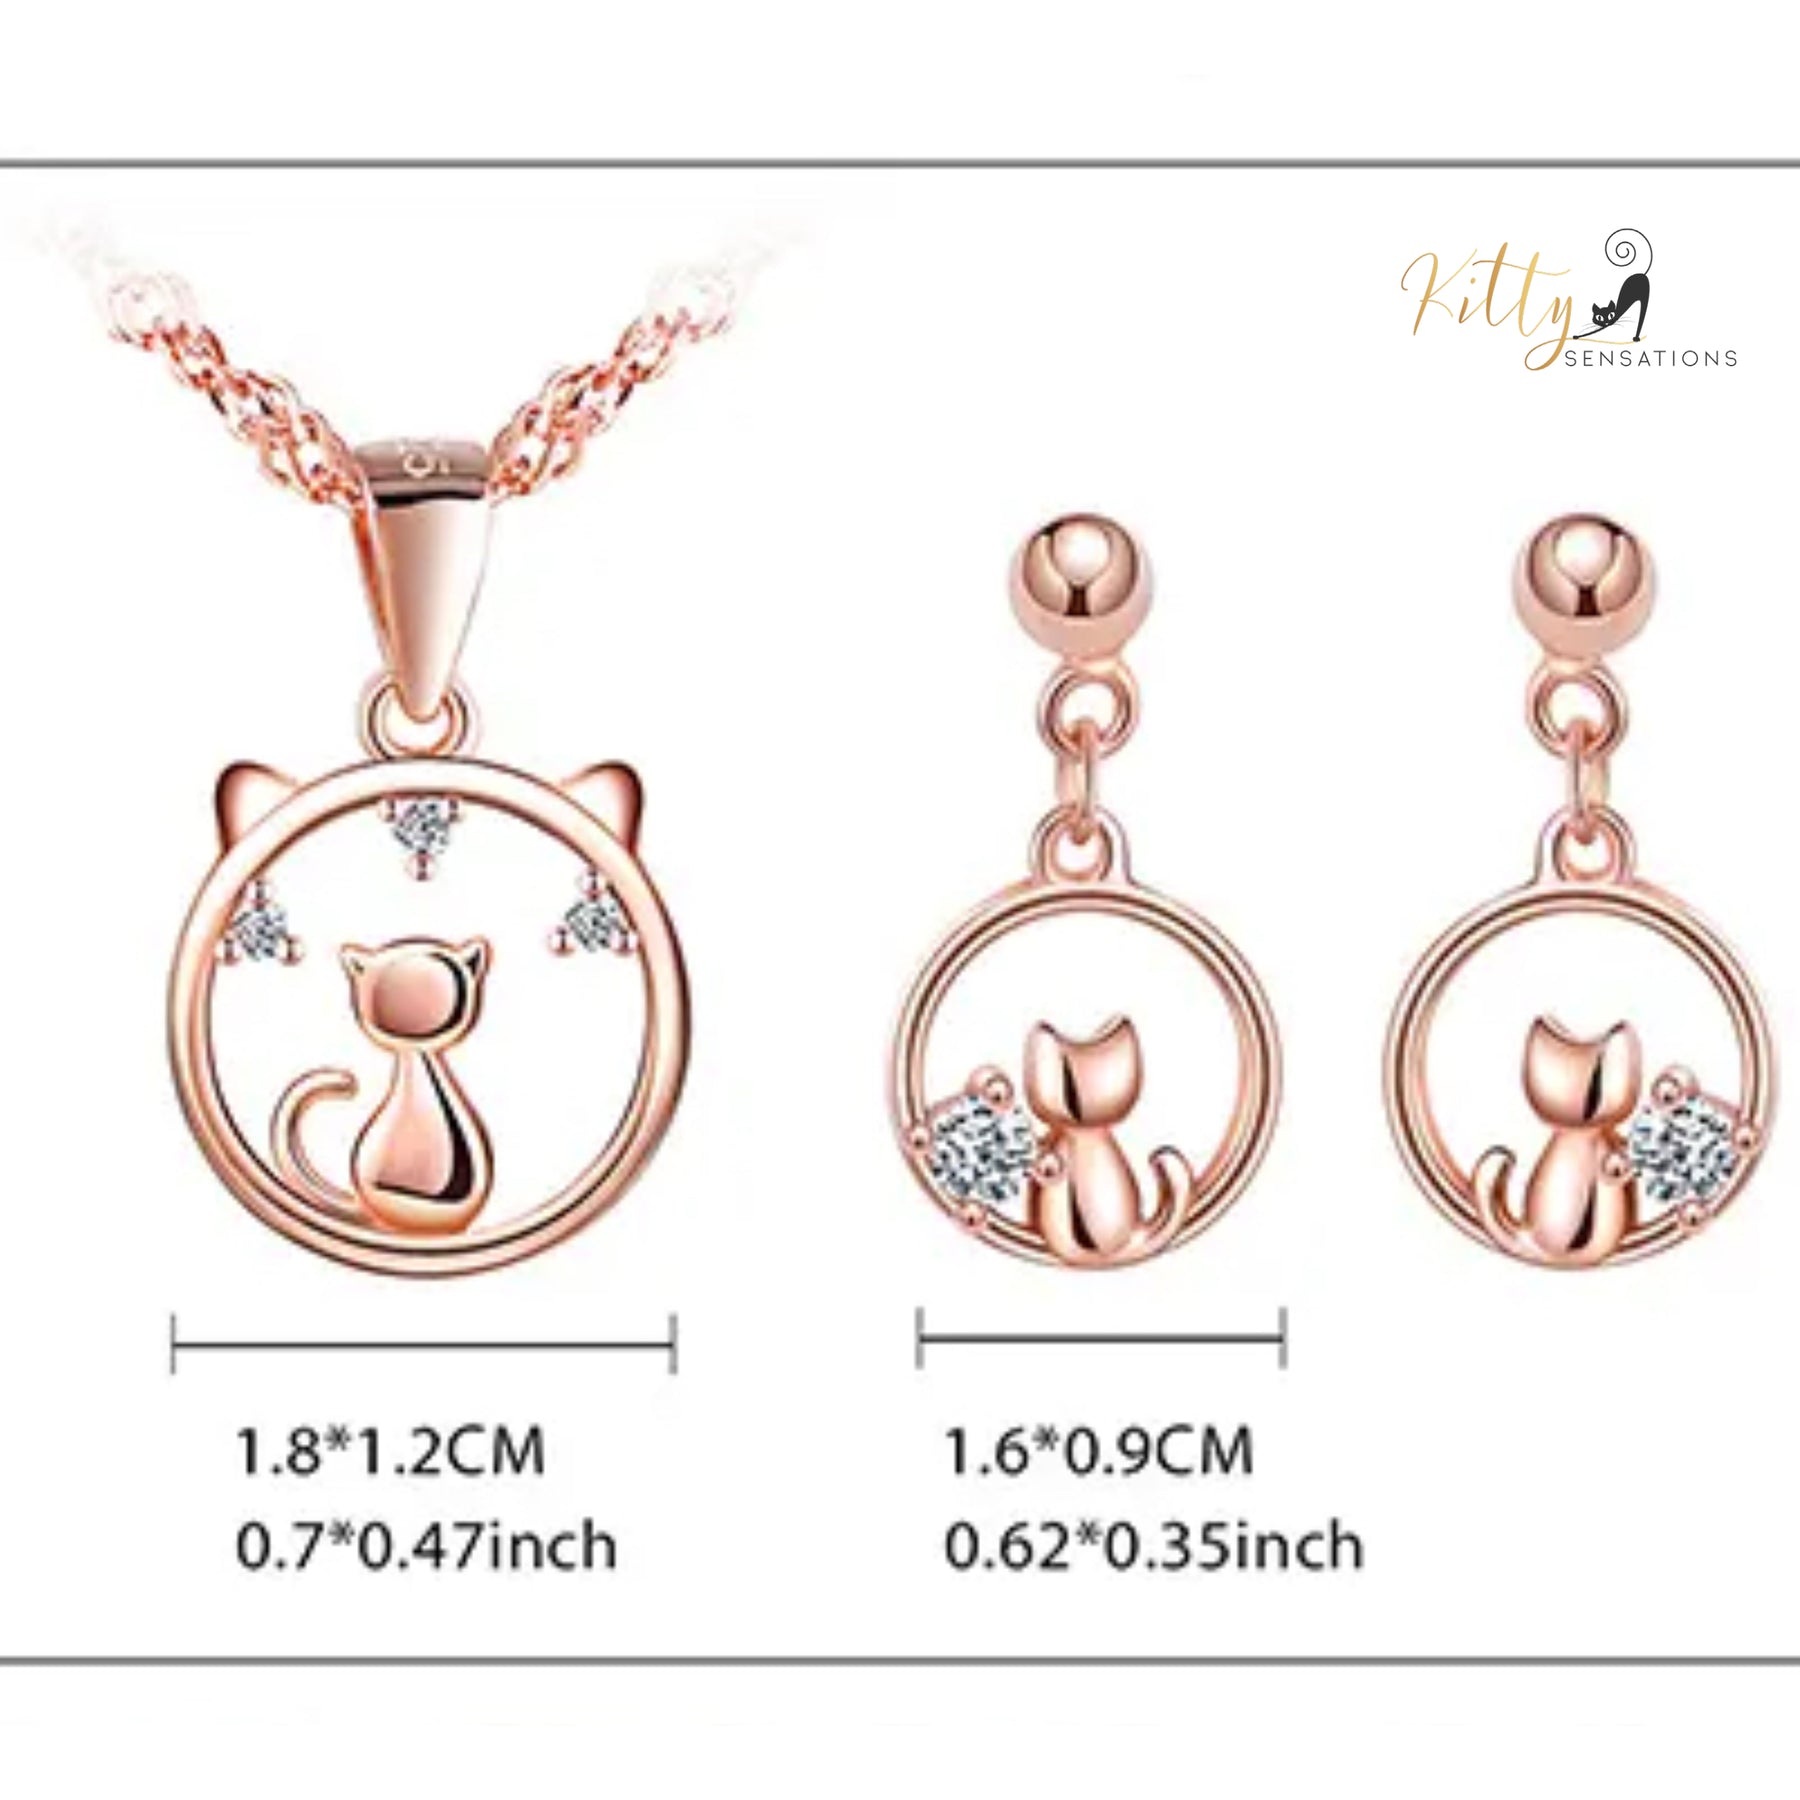 www.KittySensations.com: Center of Your World CZ Cat Jewelry Set in Solid 925 Sterling Silver (Rose Gold Plated) ($76.33): https://www.kittysensations.com/products/center-of-your-world-cat-jewelry-set-in-solid-925-sterling-silver-rose-gold-plated